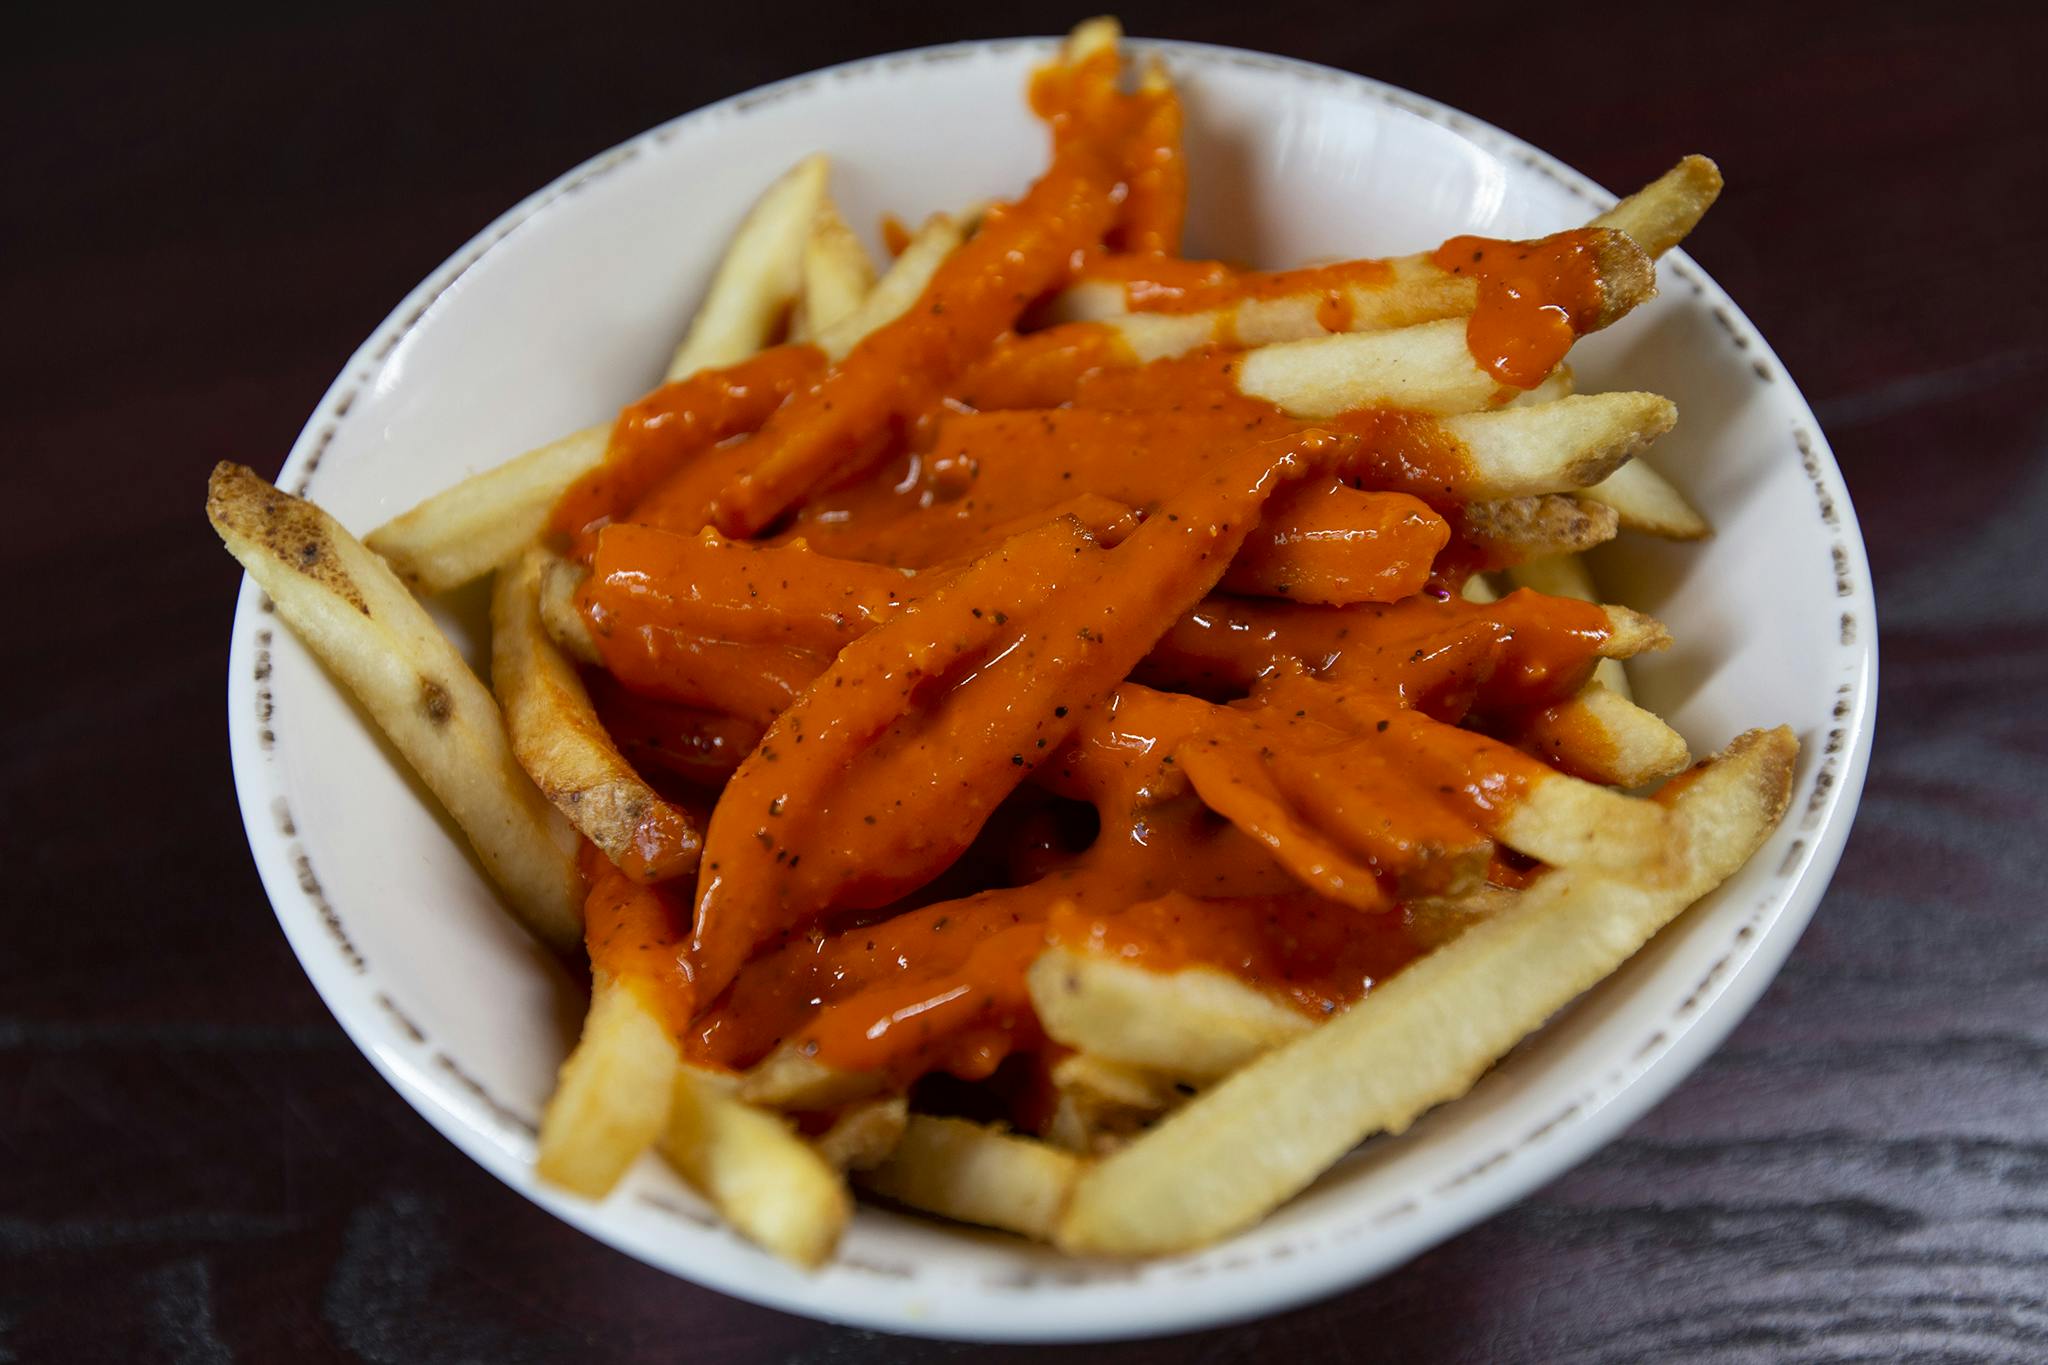 Buffalo Fries from Firehouse Grill - Chicago Ave in Evanston, IL